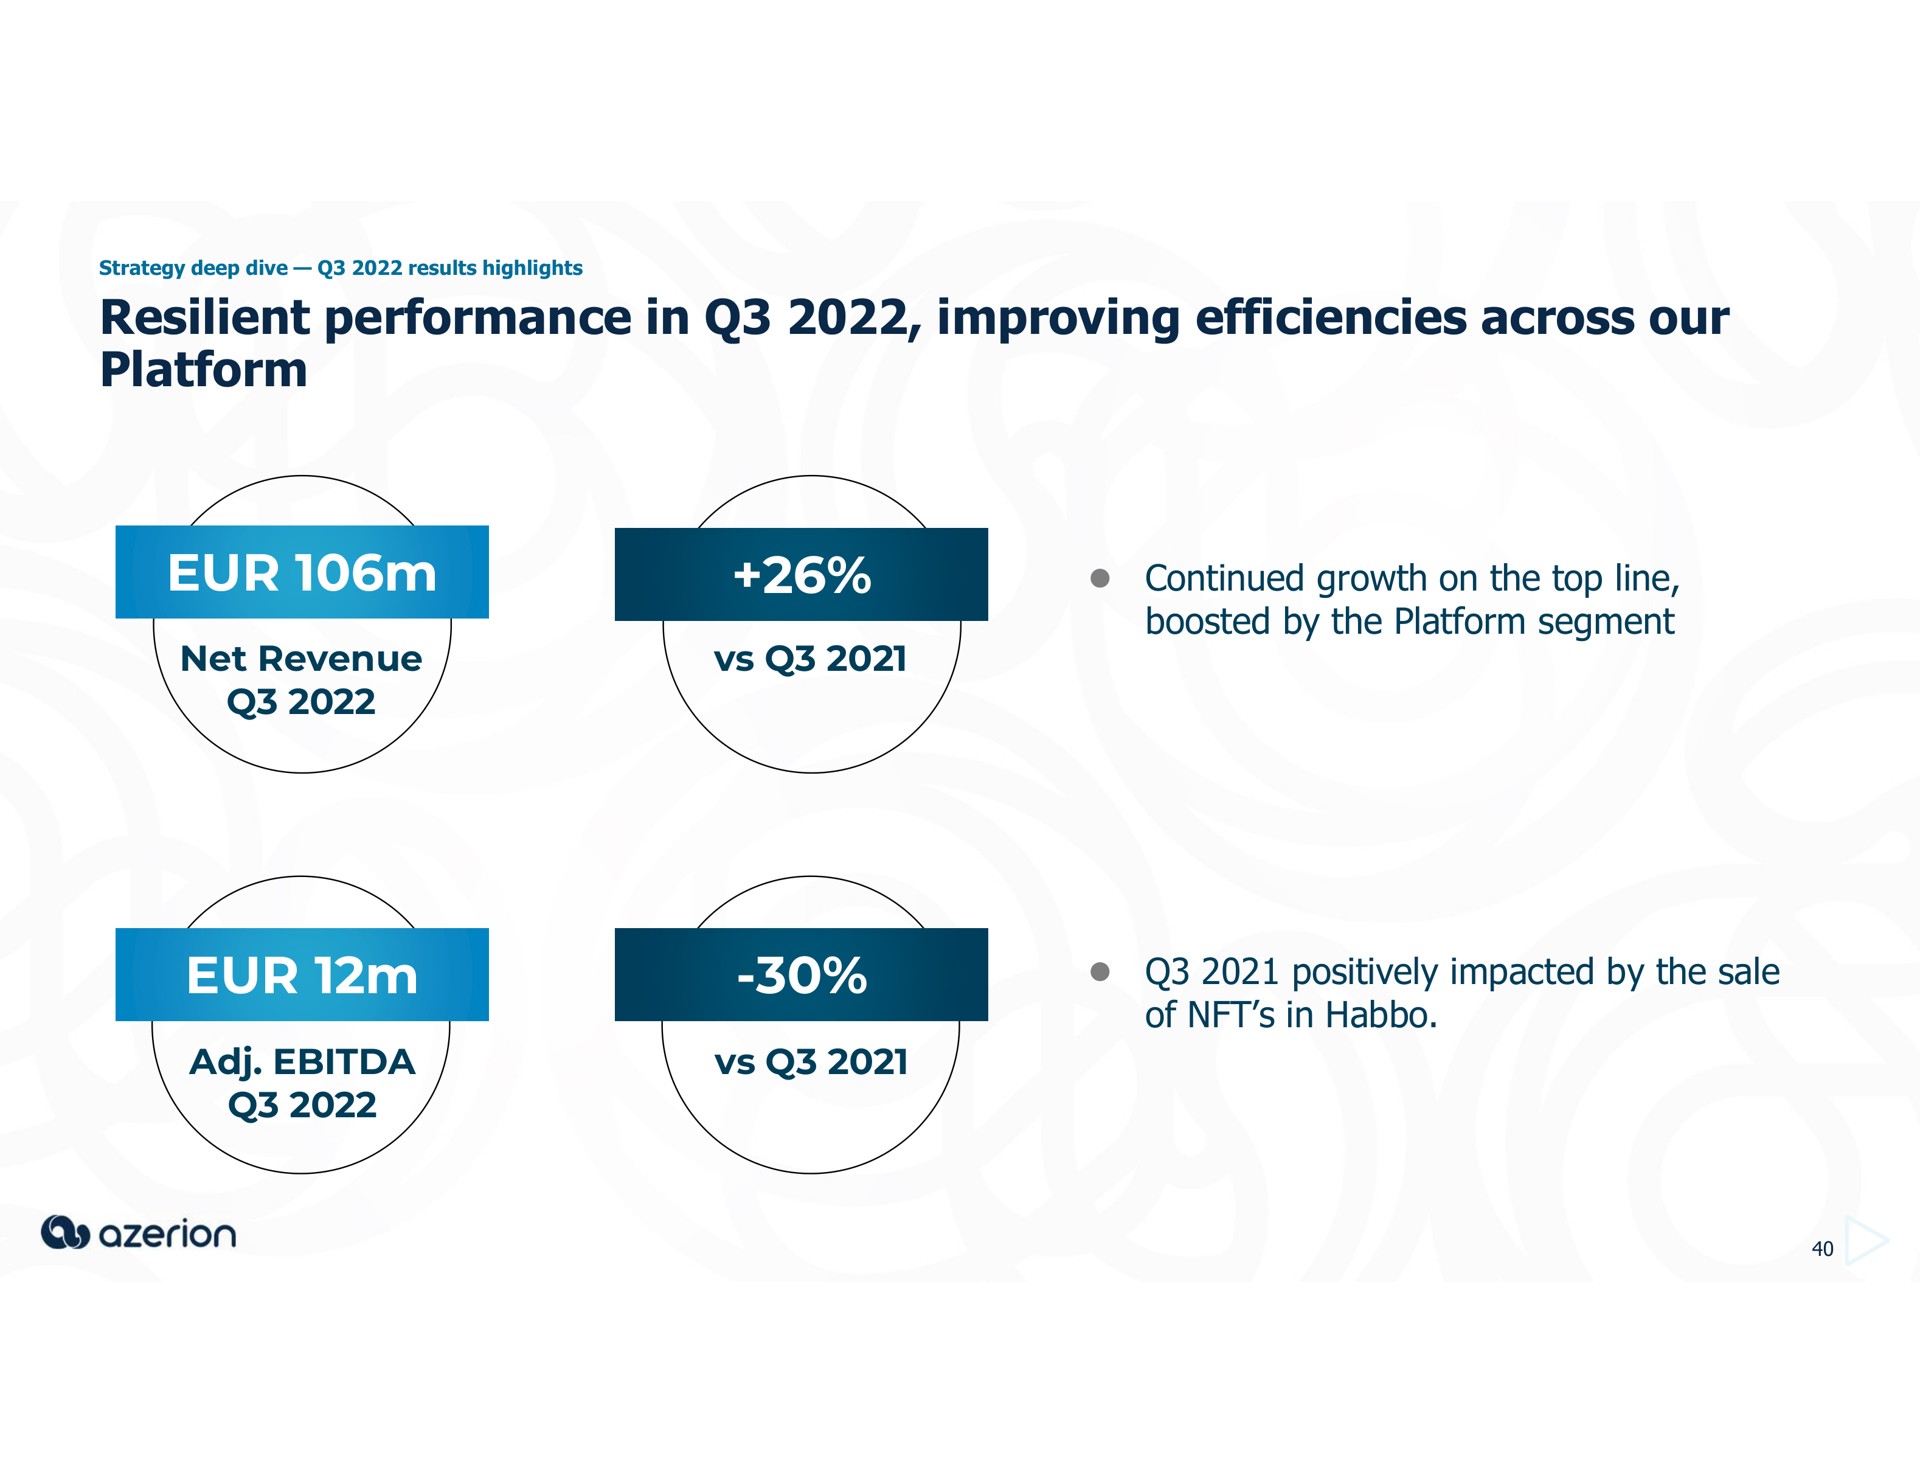 resilient performance in improving efficiencies across our platform net revenue continued growth on the top line boosted by the platform segment positively impacted by the sale of in | Azerion